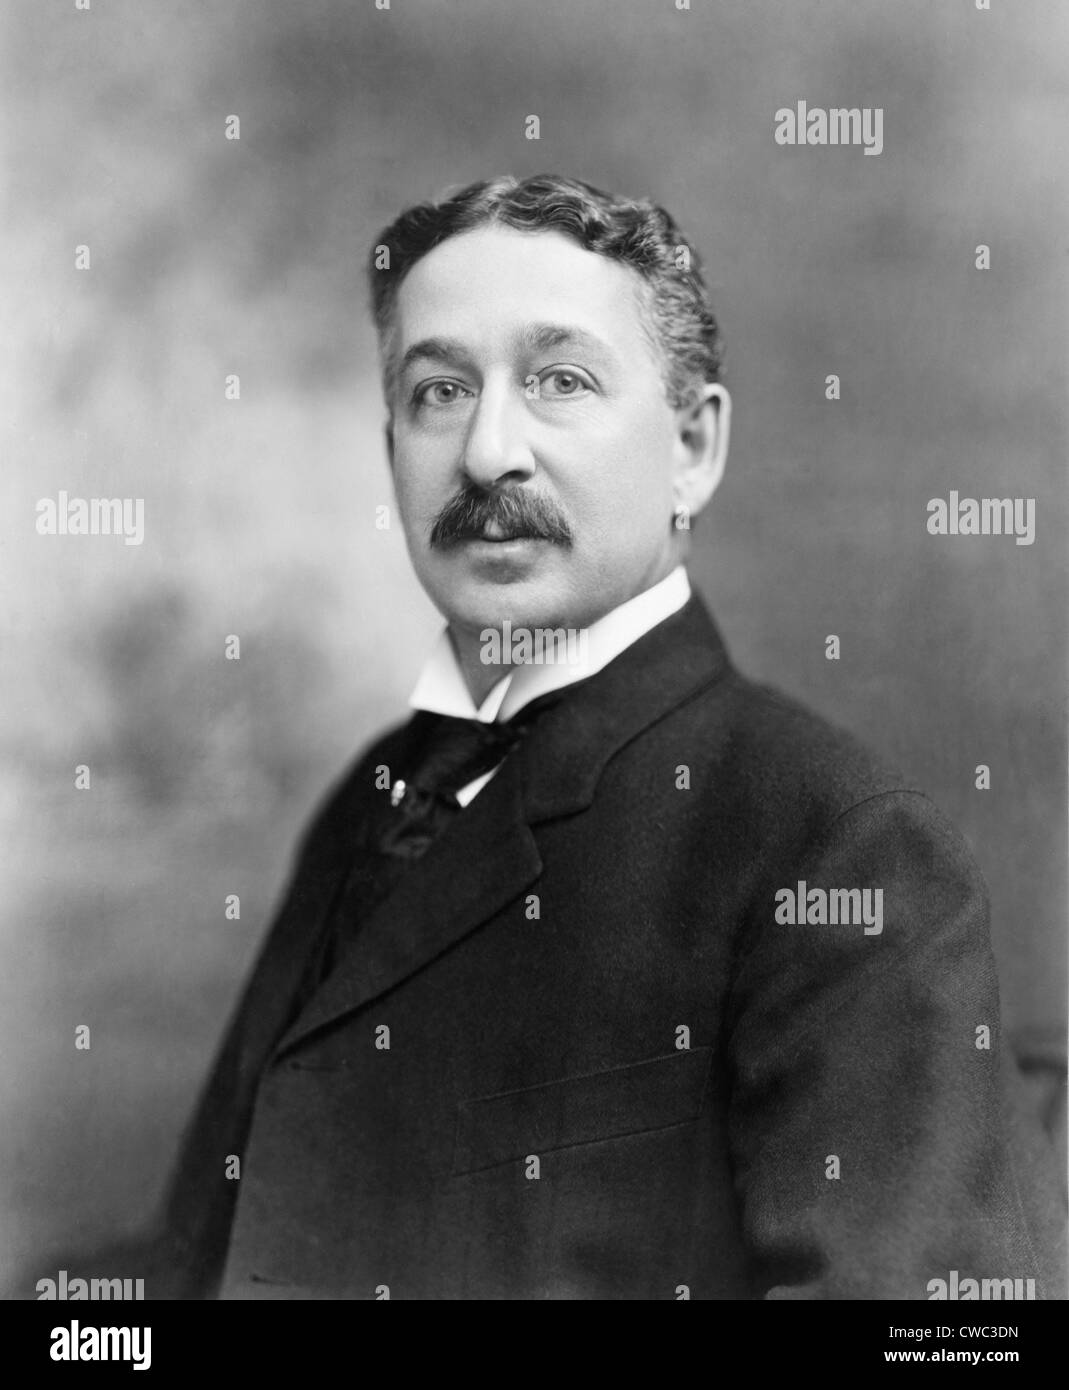 King Camp Gillette 1855-1932 founded the Gillette Safety Razor Company in 1902 and sold razors and their disposable steel Stock Photo